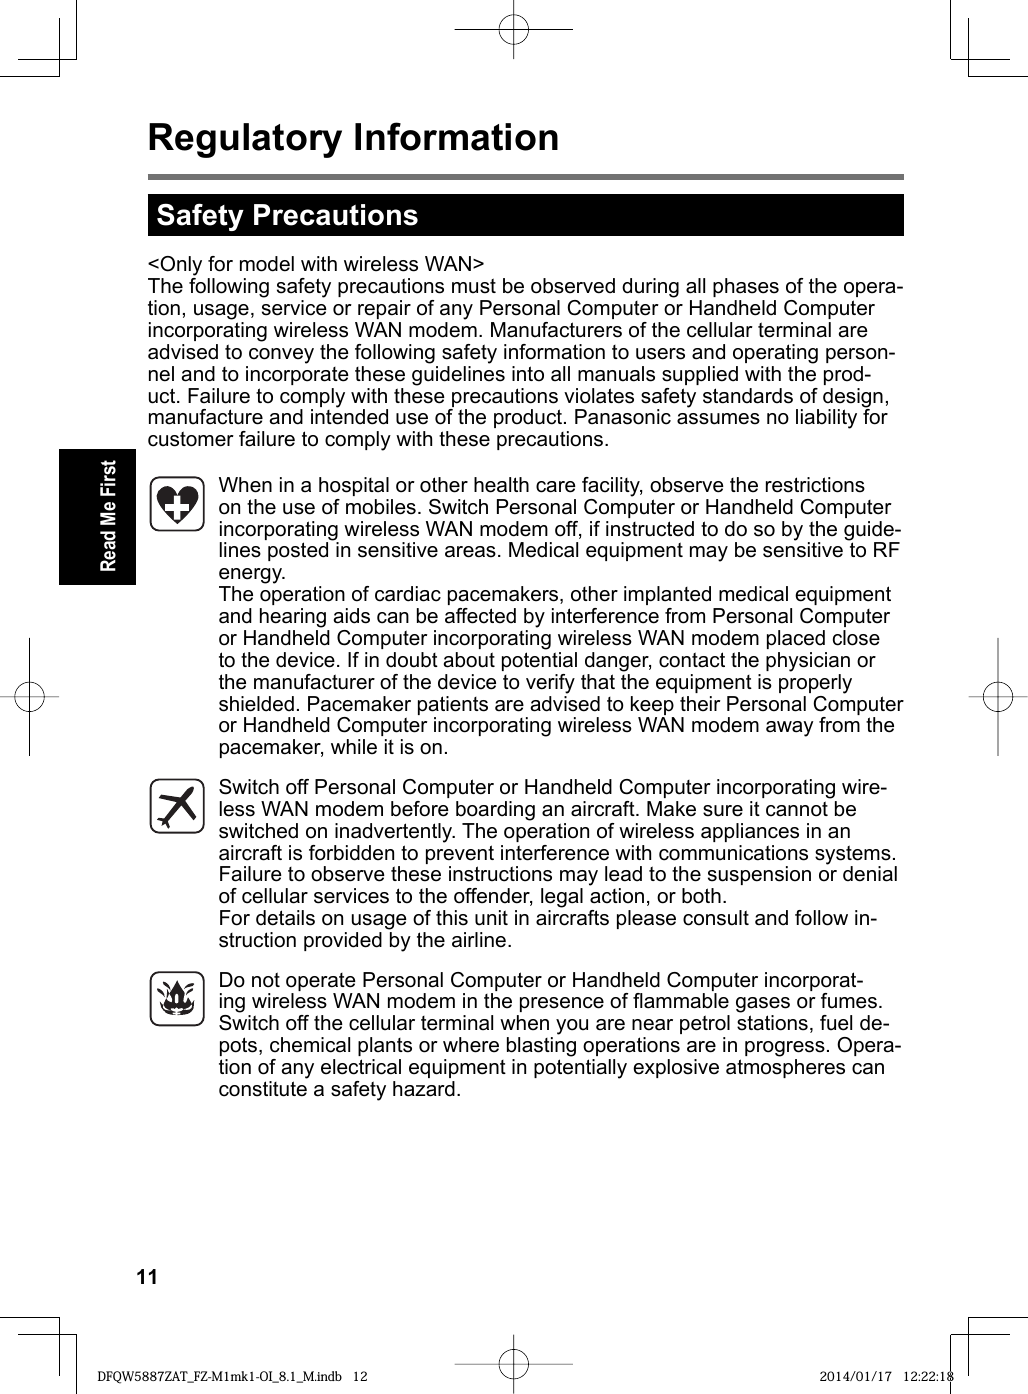 11Read Me FirstRegulatory Information&lt;Only for model with wireless WAN&gt;The following safety precautions must be observed during all phases of the opera-tion, usage, service or repair of any Personal Computer or Handheld Computer incorporating wireless WAN modem. Manufacturers of the cellular terminal are advised to convey the following safety information to users and operating person-nel and to incorporate these guidelines into all manuals supplied with the prod-uct. Failure to comply with these precautions violates safety standards of design, manufacture and intended use of the product. Panasonic assumes no liability for customer failure to comply with these precautions.When in a hospital or other health care facility, observe the restrictions on the use of mobiles. Switch Personal Computer or Handheld Computer incorporating wireless WAN modem off, if instructed to do so by the guide-lines posted in sensitive areas. Medical equipment may be sensitive to RF energy. The operation of cardiac pacemakers, other implanted medical equipment and hearing aids can be affected by interference from Personal Computer or Handheld Computer incorporating wireless WAN modem placed close to the device. If in doubt about potential danger, contact the physician or the manufacturer of the device to verify that the equipment is properly shielded. Pacemaker patients are advised to keep their Personal Computer or Handheld Computer incorporating wireless WAN modem away from the pacemaker, while it is on.Switch off Personal Computer or Handheld Computer incorporating wire-less WAN modem before boarding an aircraft. Make sure it cannot be switched on inadvertently. The operation of wireless appliances in an aircraft is forbidden to prevent interference with communications systems. Failure to observe these instructions may lead to the suspension or denial of cellular services to the offender, legal action, or both.For details on usage of this unit in aircrafts please consult and follow in-struction provided by the airline.Do not operate Personal Computer or Handheld Computer incorporat-ing wireless WAN modem in the presence of ﬂ ammable gases or fumes. Switch off the cellular terminal when you are near petrol stations, fuel de-pots, chemical plants or where blasting operations are in progress. Opera-tion of any electrical equipment in potentially explosive atmospheres can constitute a safety hazard.Safety PrecautionsDFQW5887ZAT_FZ-M1mk1-OI_8.1_M.indb 12DFQW5887ZAT_FZ-M1mk1-OI_8.1_M.indb   12 2014/01/17 12:22:182014/01/17   12:22:18